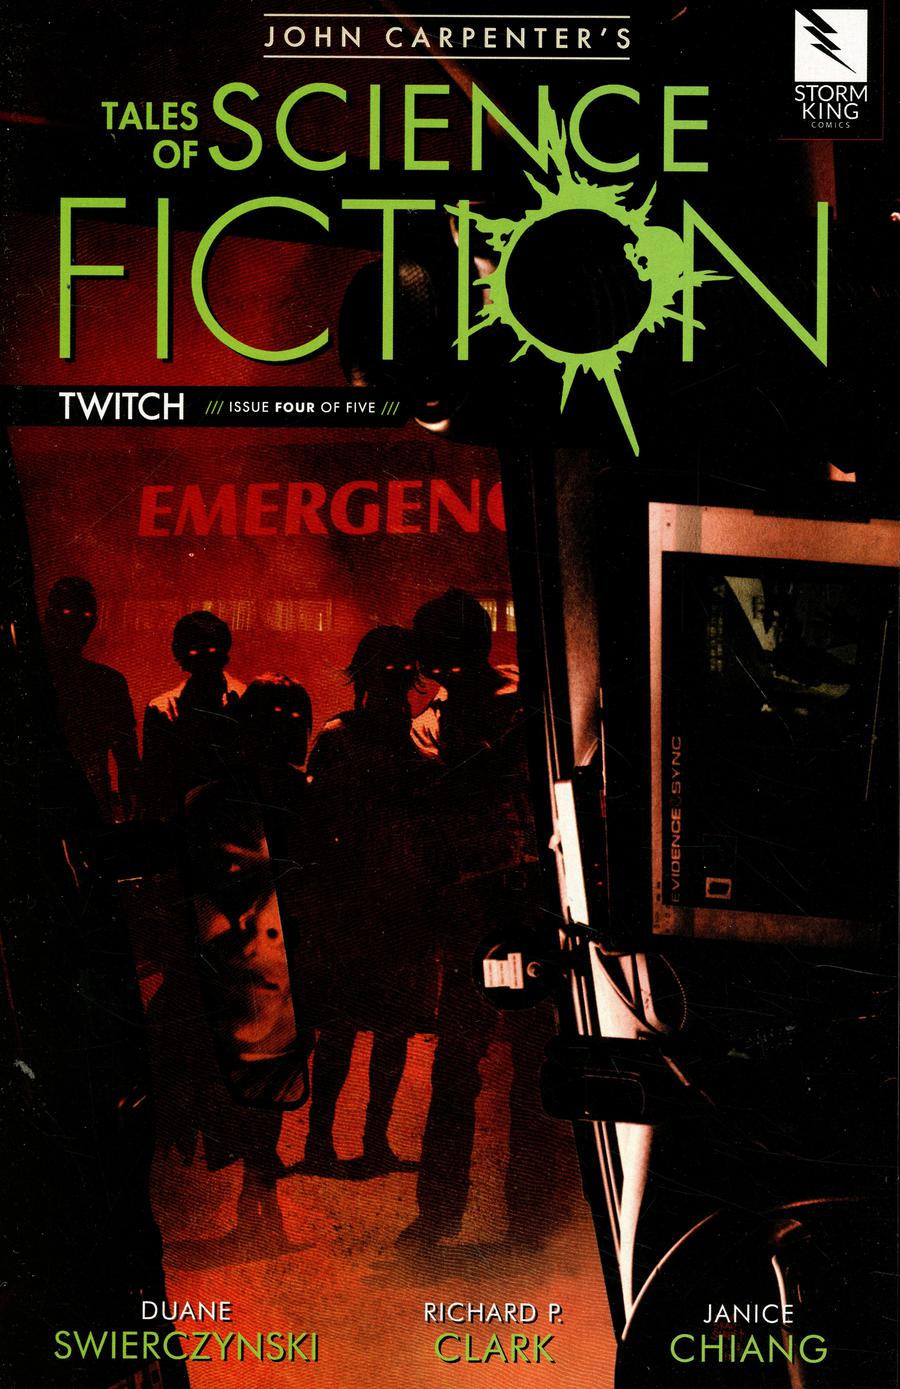 John Carpenters Tales Of Science Fiction Twitch #4 Cover A Tim Bradstreet Crowd